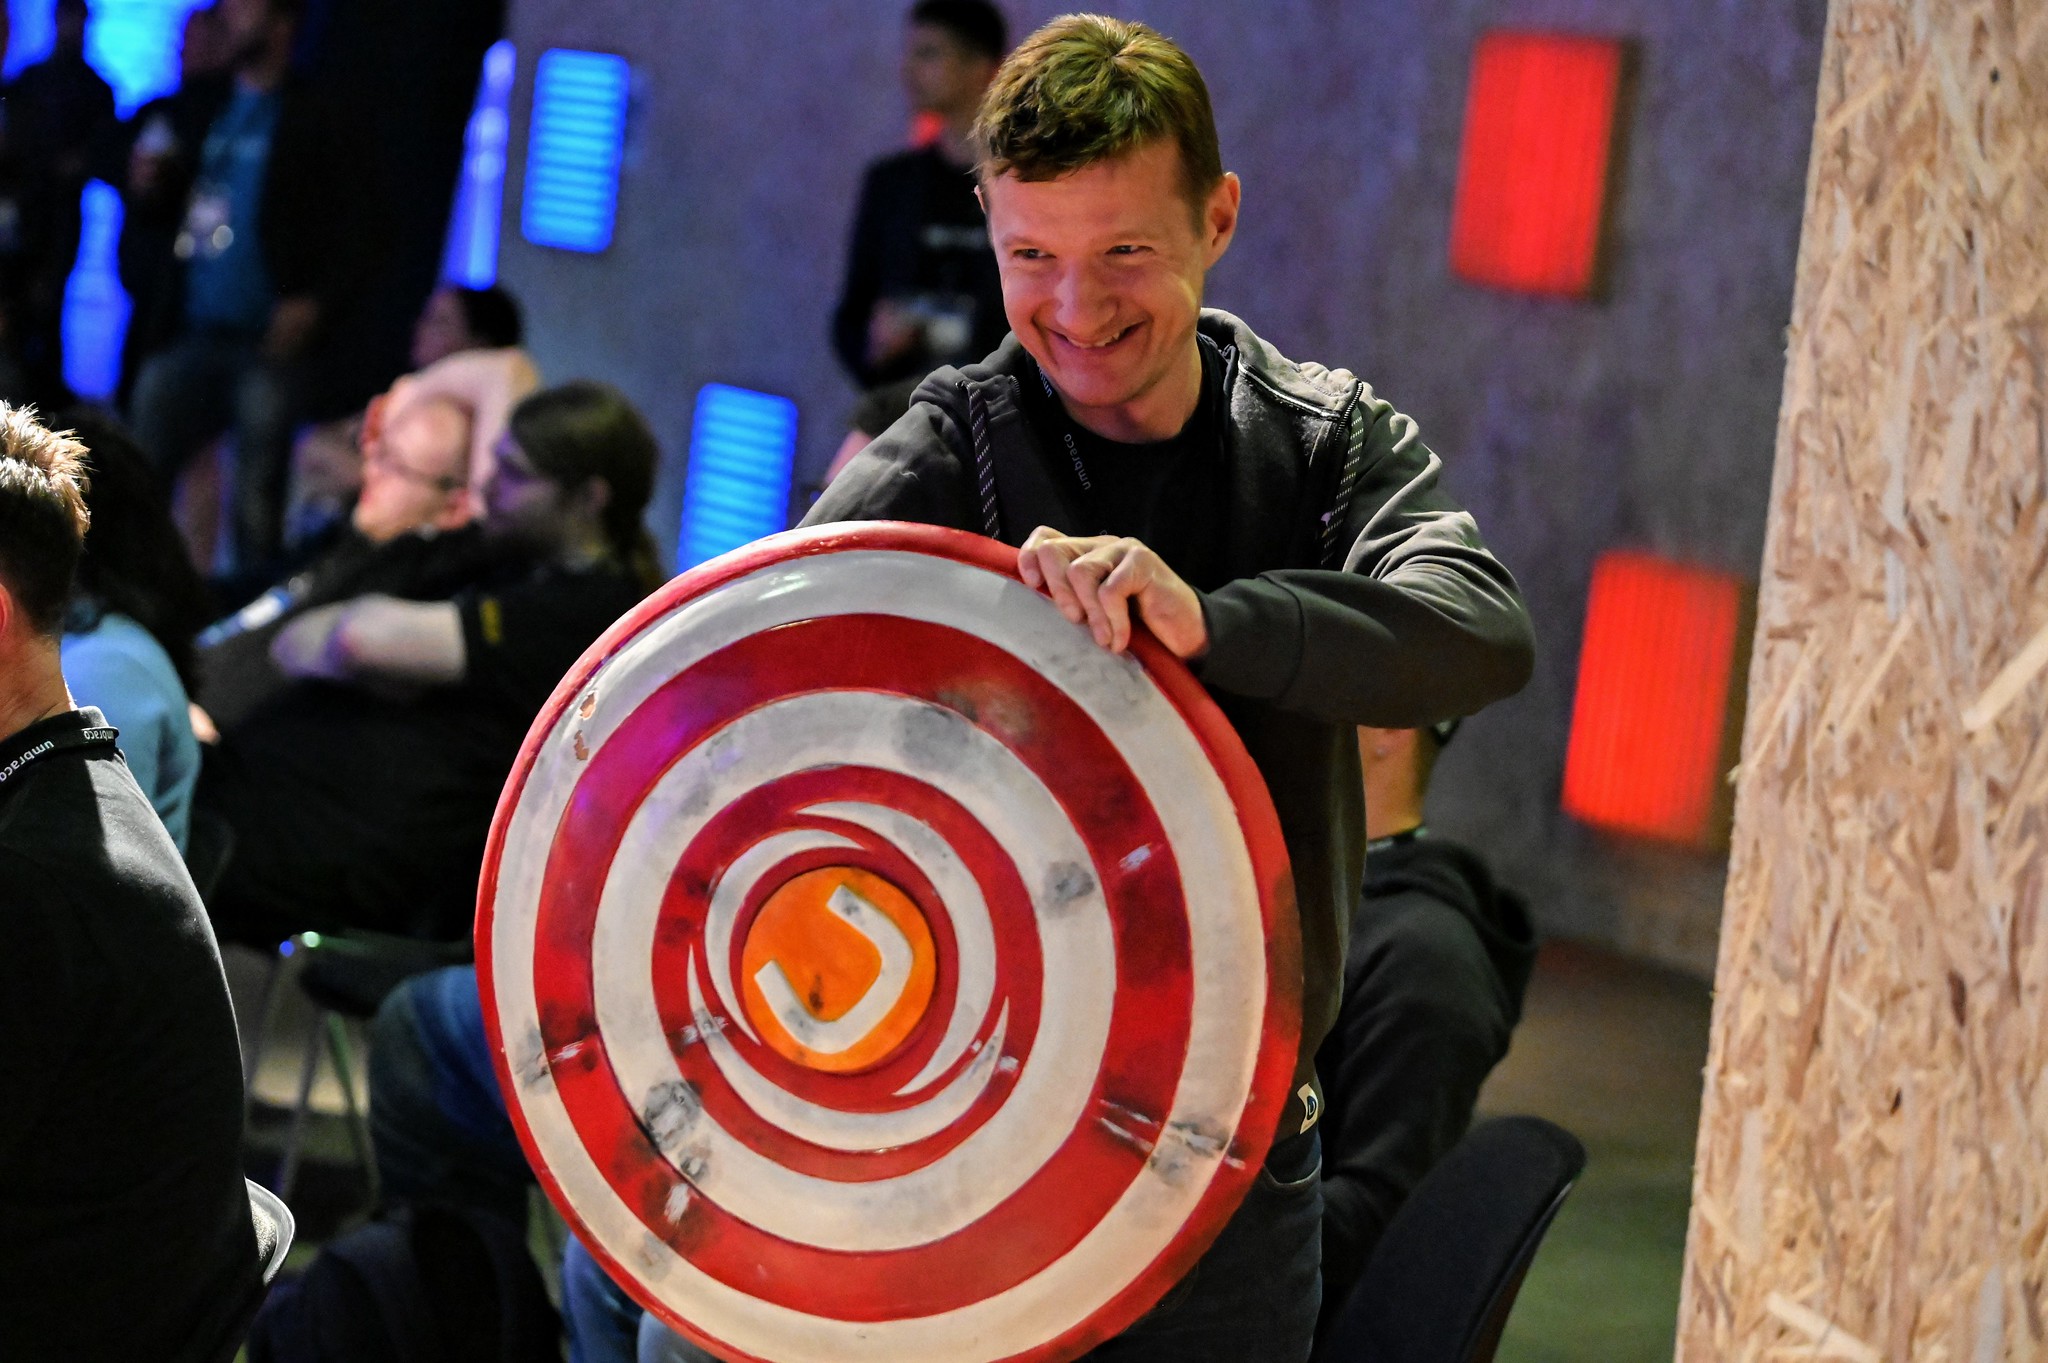 A photo by Umbraco HQ on Flickr of a man holding a Captain America-style shield with an orange Umbraco logo in the centre